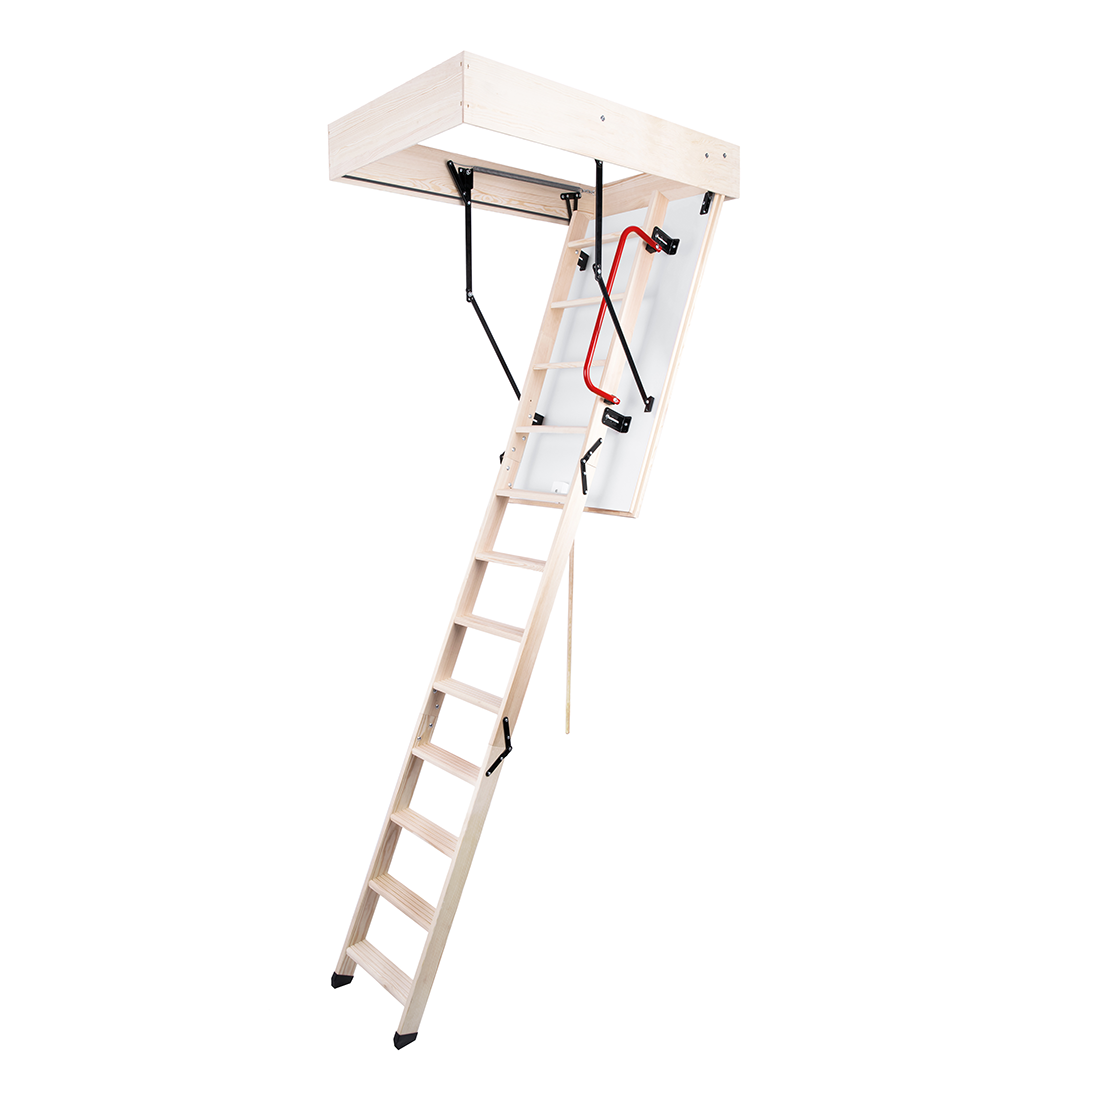 S-GLOB Wooden Attic Ladder 54" x 22.5"- Up to 9.18 feet